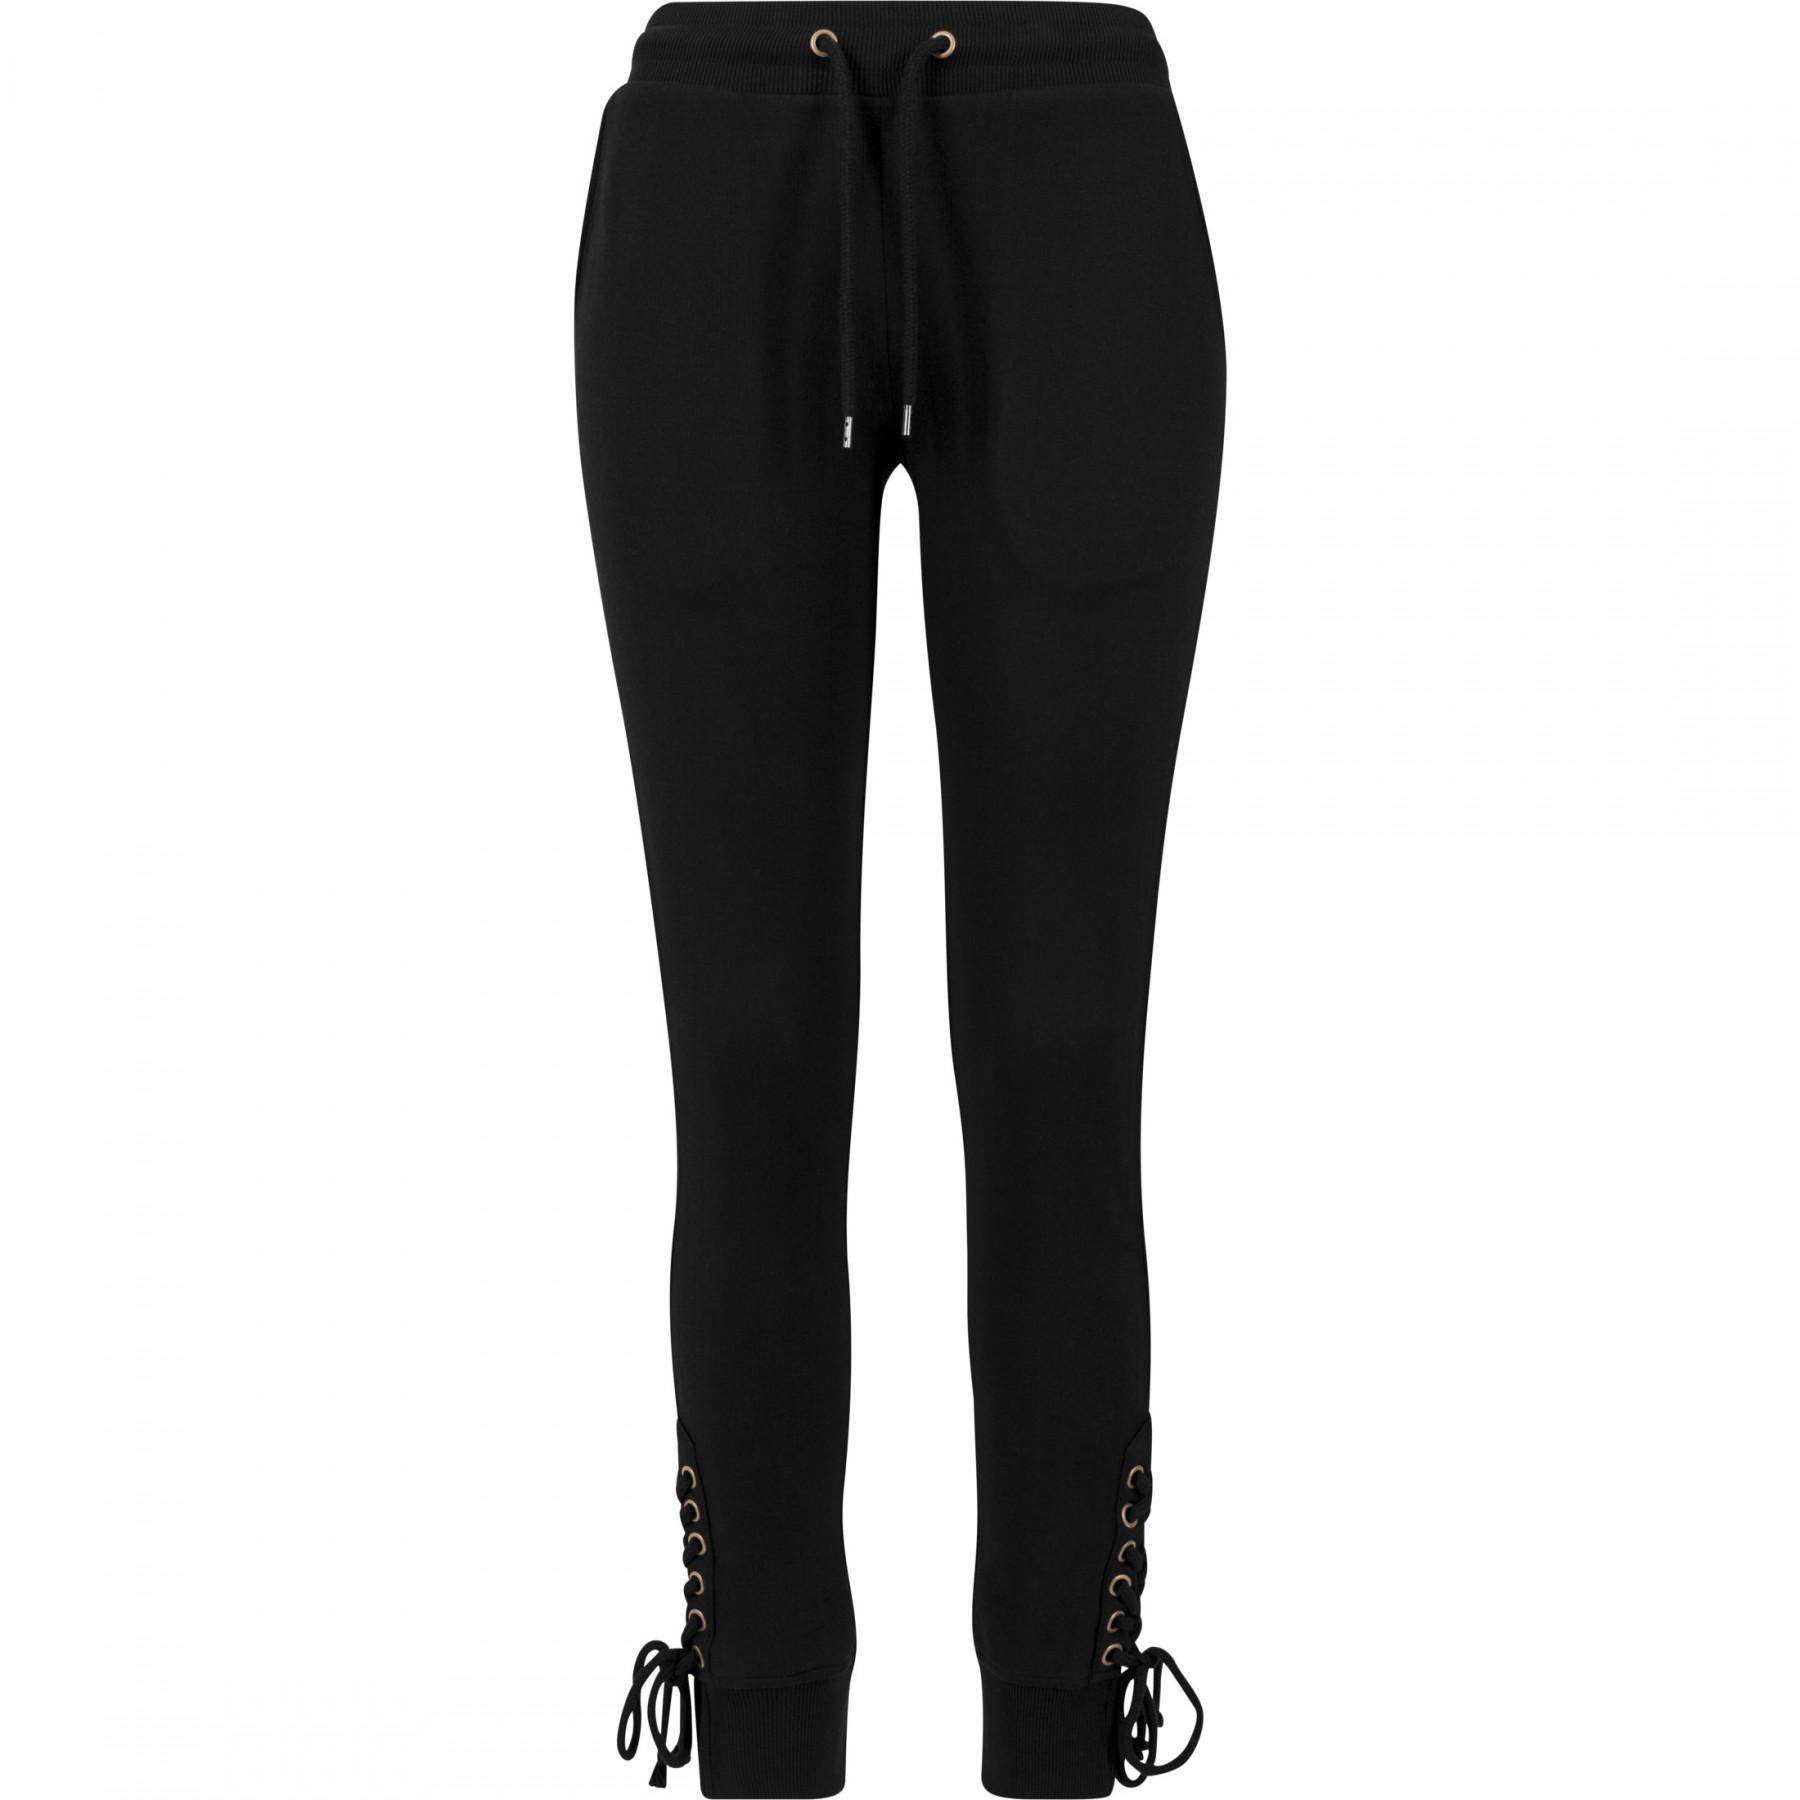 Trousers woman Urban Classic fitted flammé